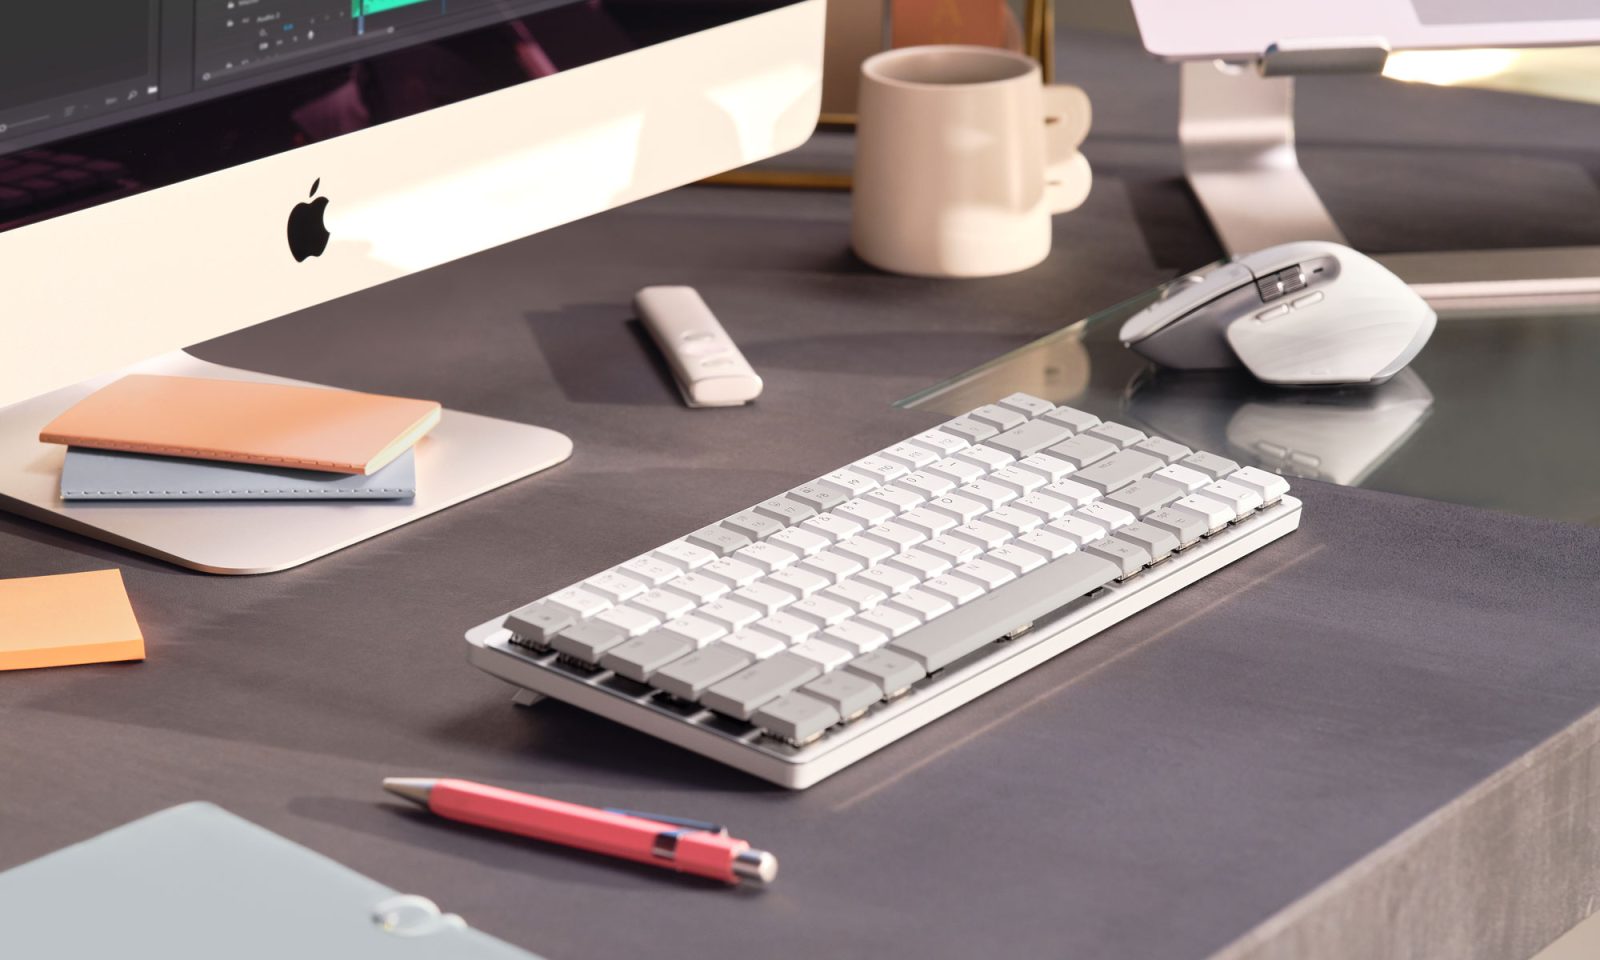 Logitech unveils Mechanical keyboard and other accessories for Mac users